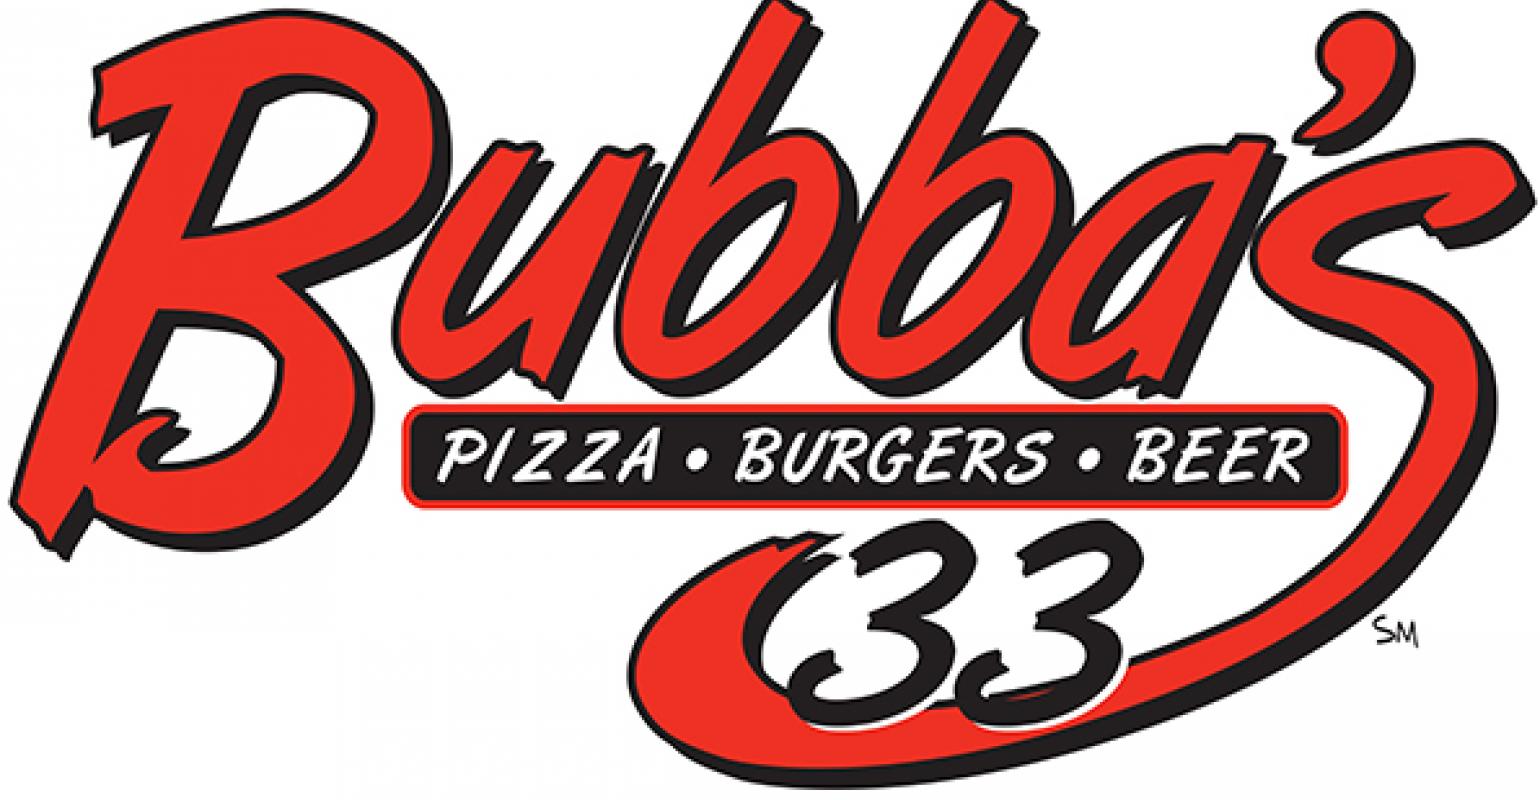 Louisville, Ky.-based company Texas Roadhouse developing more Bubba's 33  units